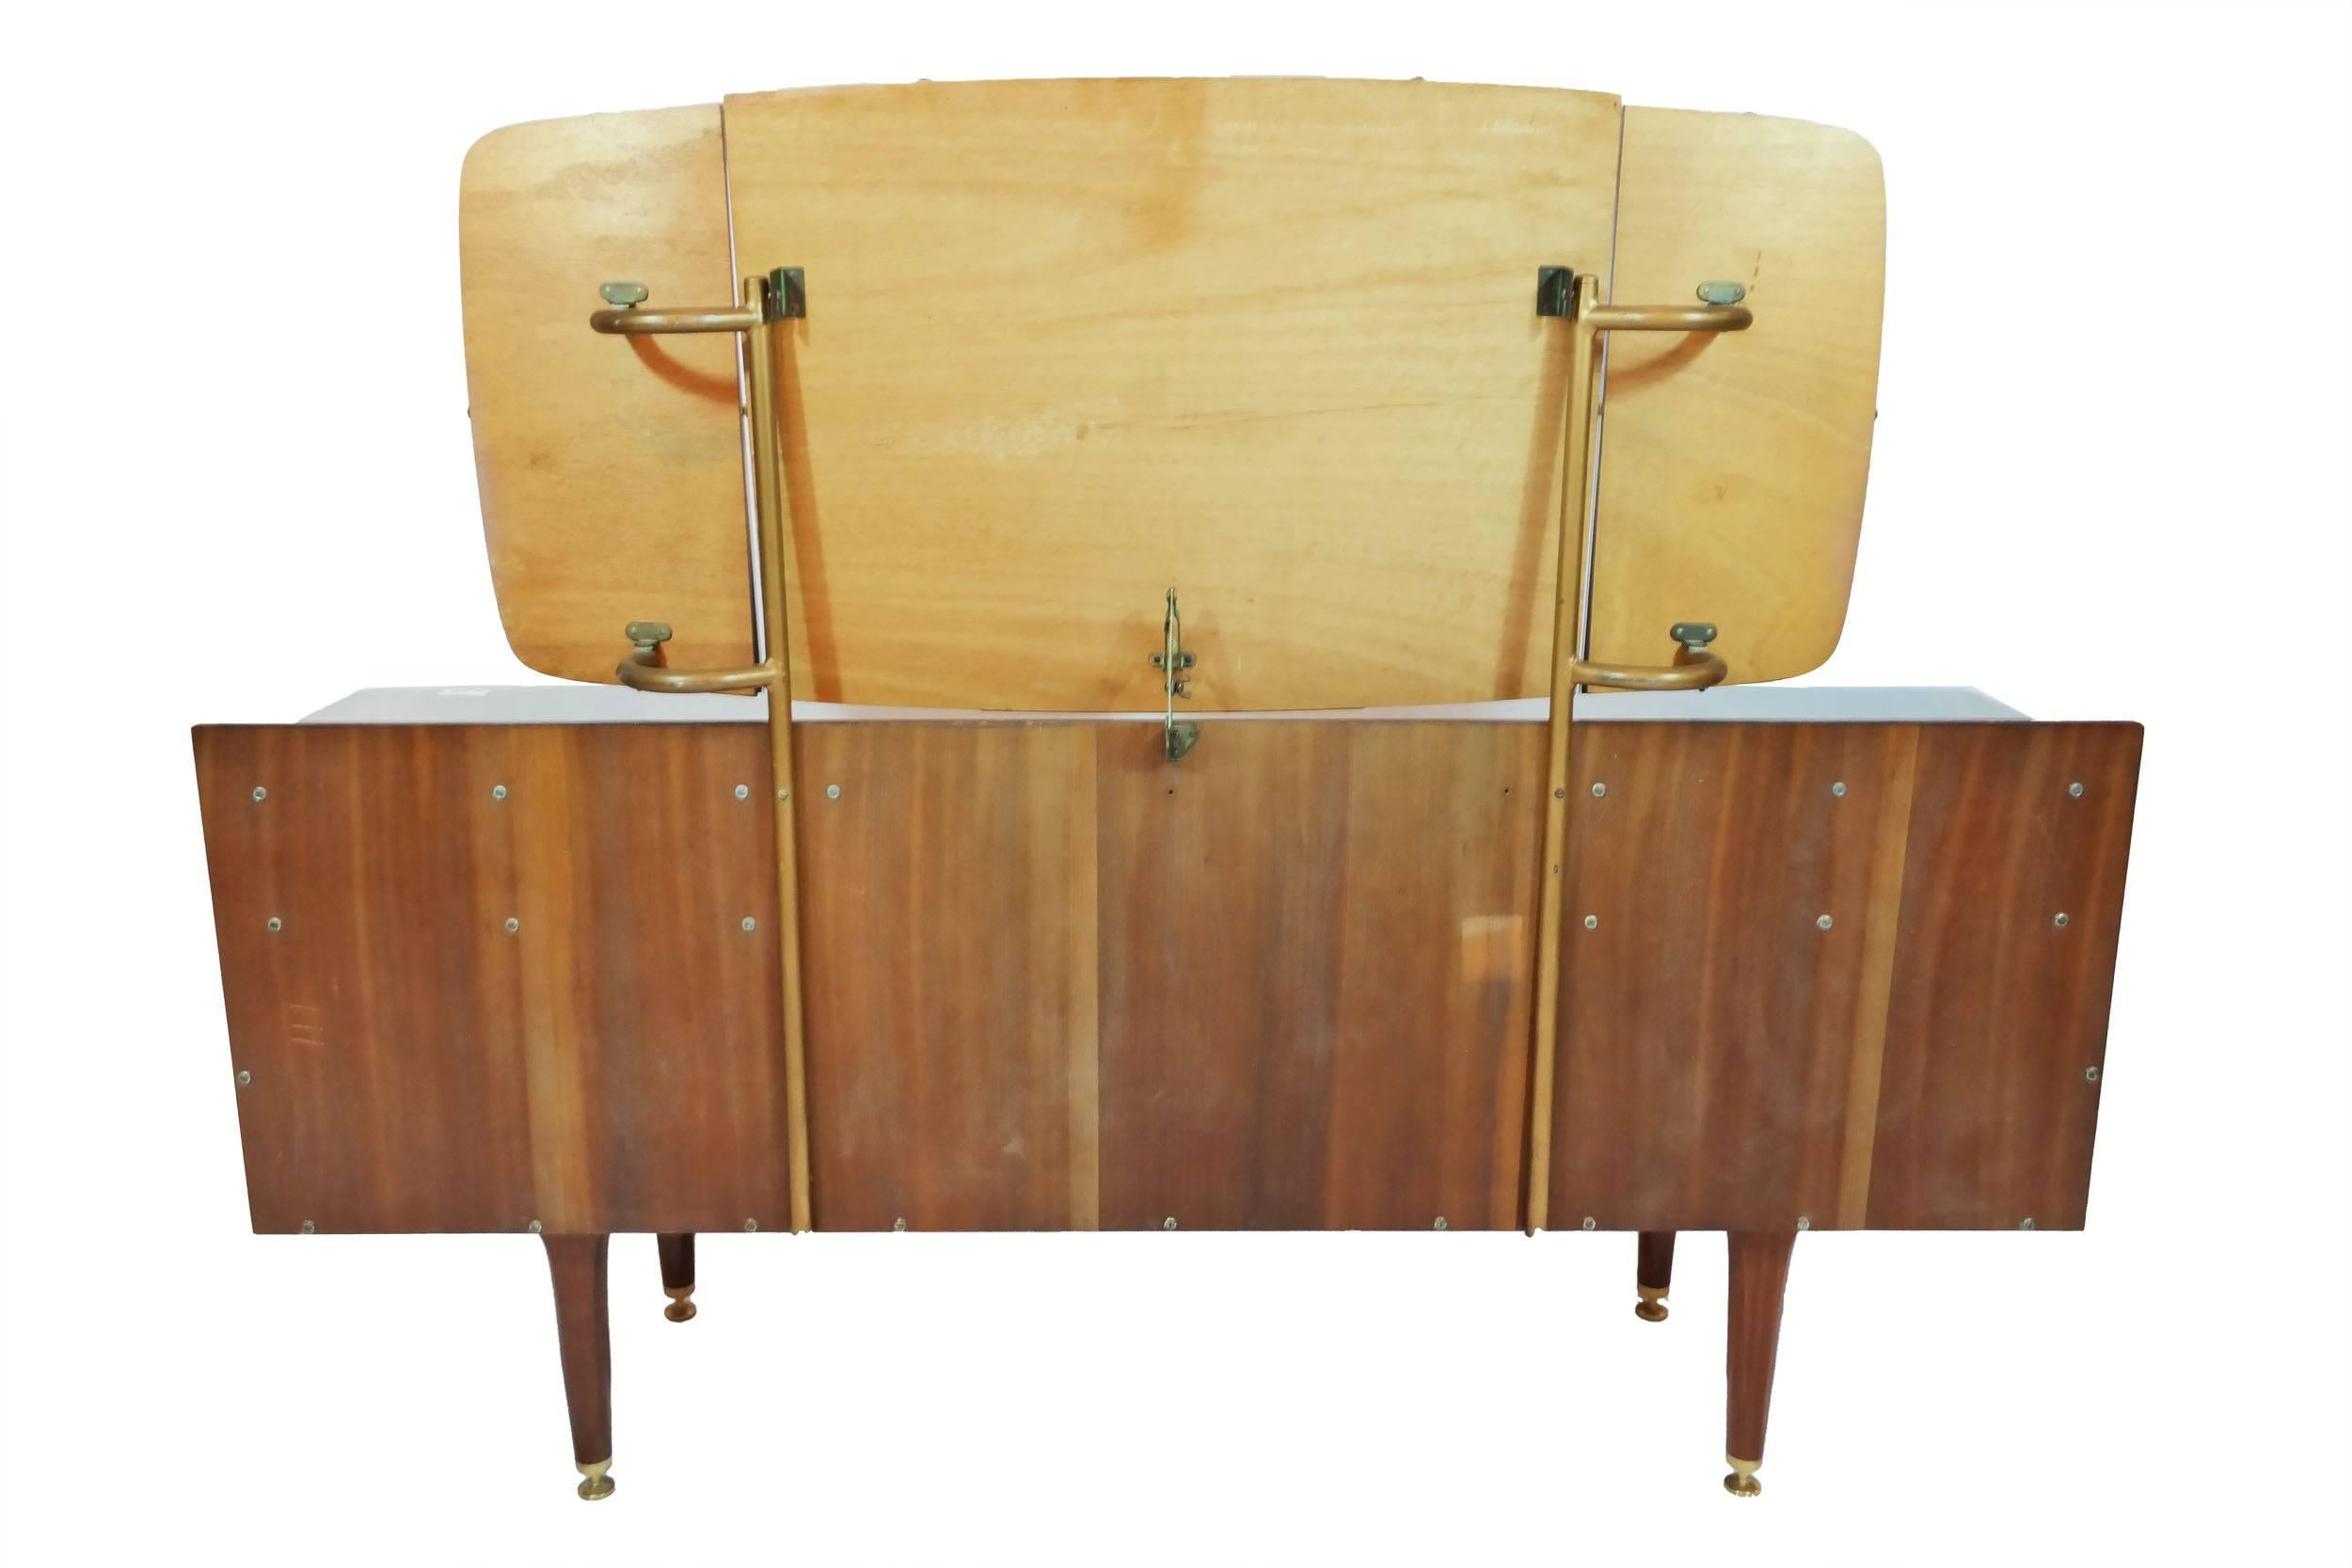 Mid-Century Modern vanity dressing table of teak and rosewood. The three mirrors are fully adjustable. Stamped G-Plan. Designed by Ib Kofod-Larsen for G-Plan.